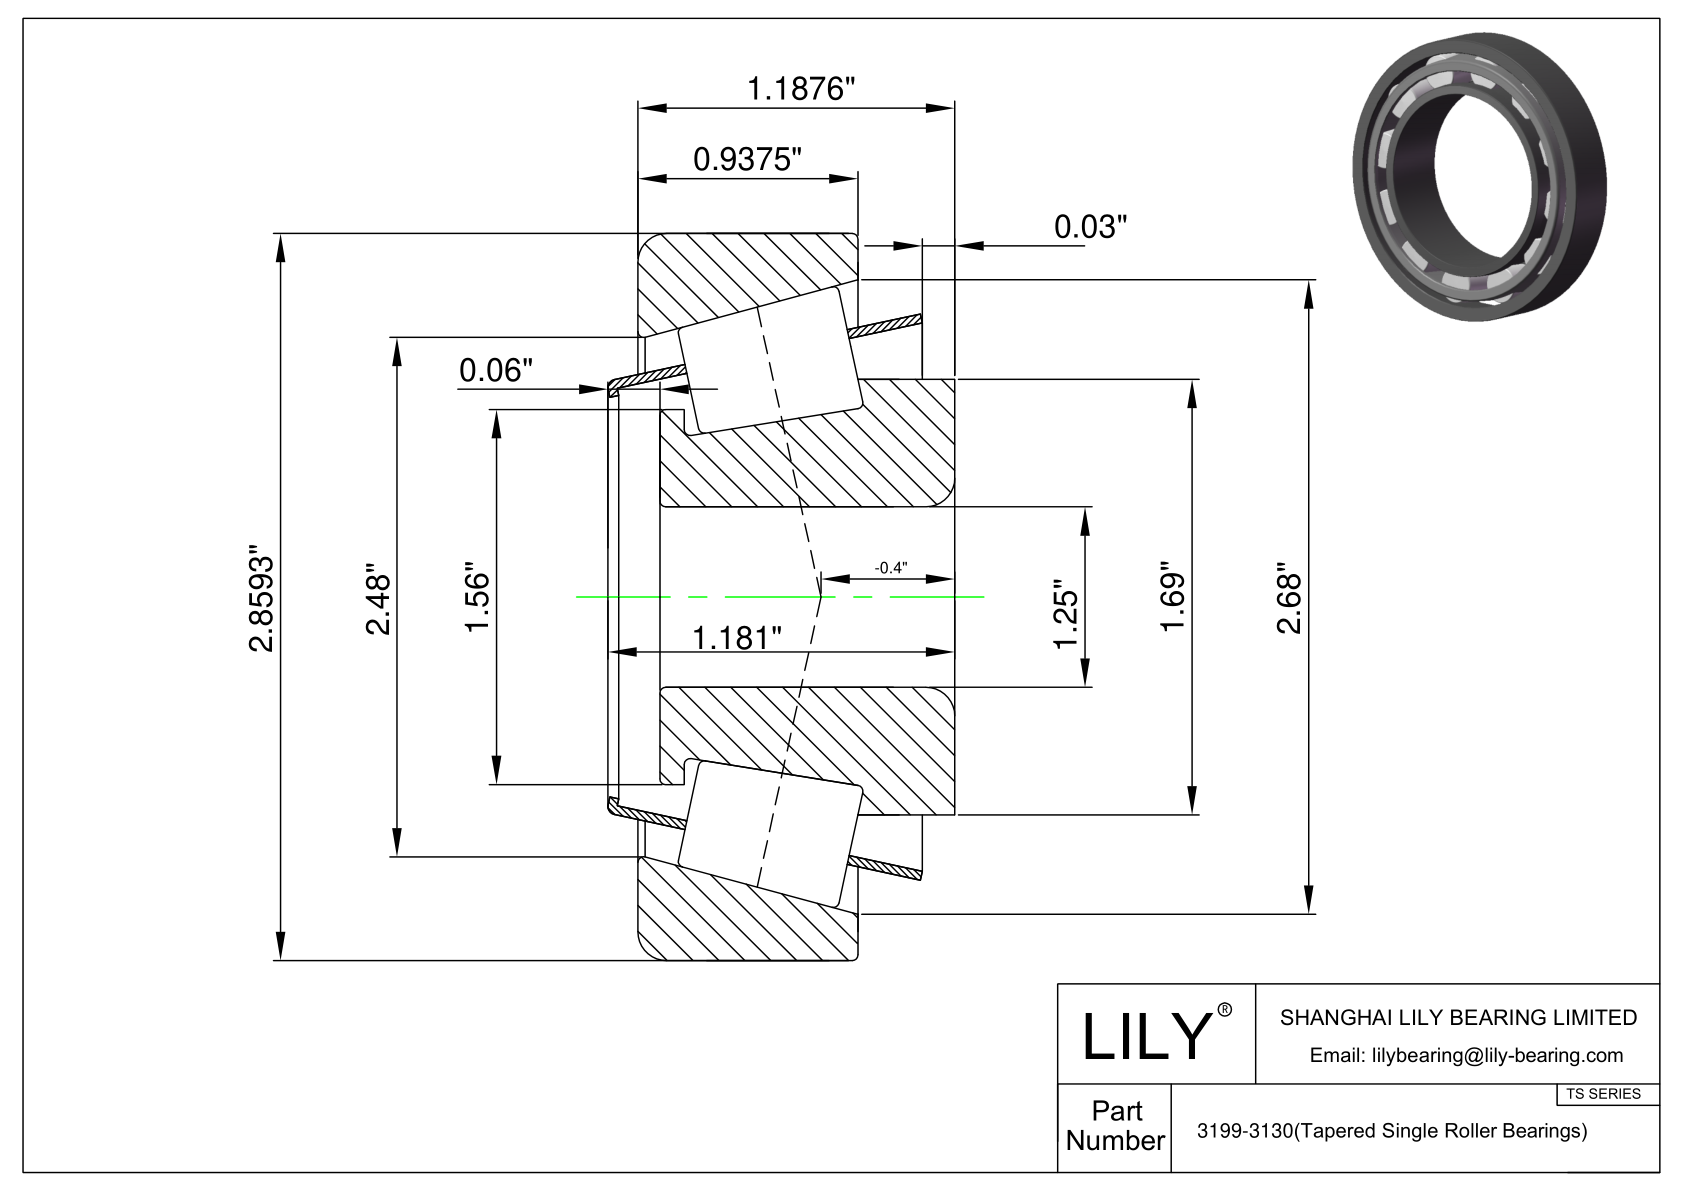 3199-3130 TS (Tapered Single Roller Bearings) (Imperial) cad drawing